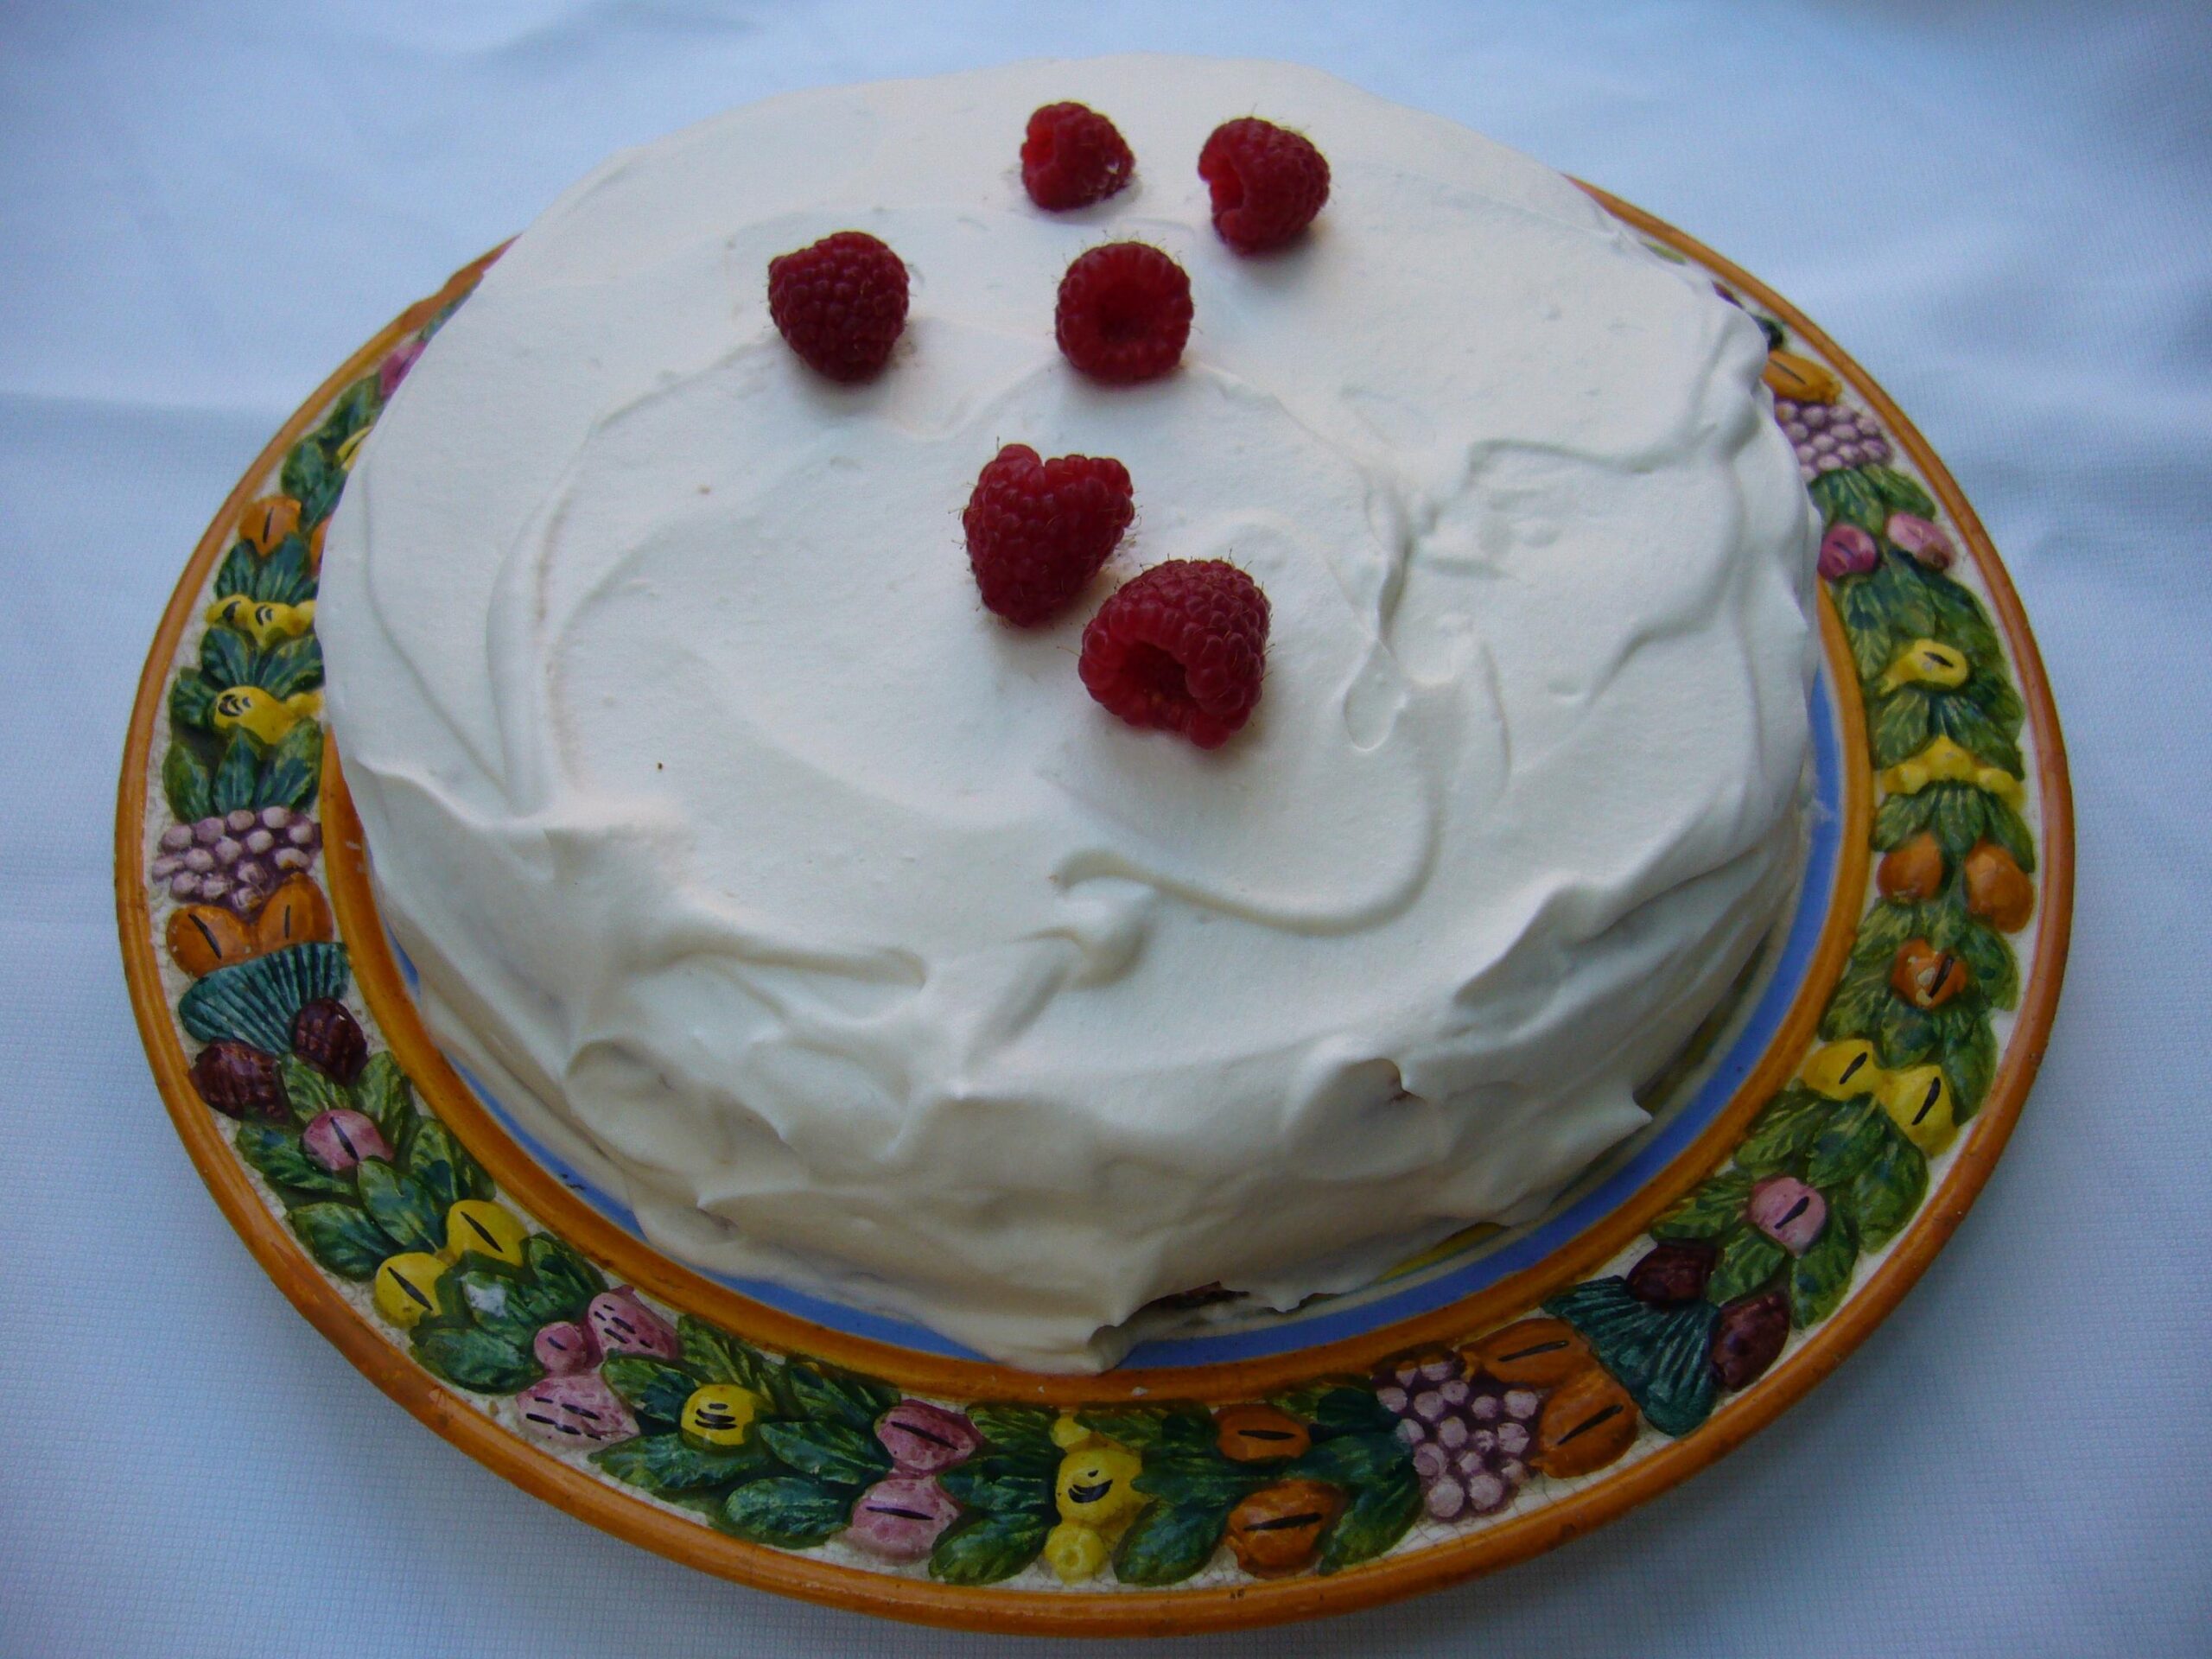  A sweet treat to delight your taste buds - Tres Leches Cake with Raspberries!